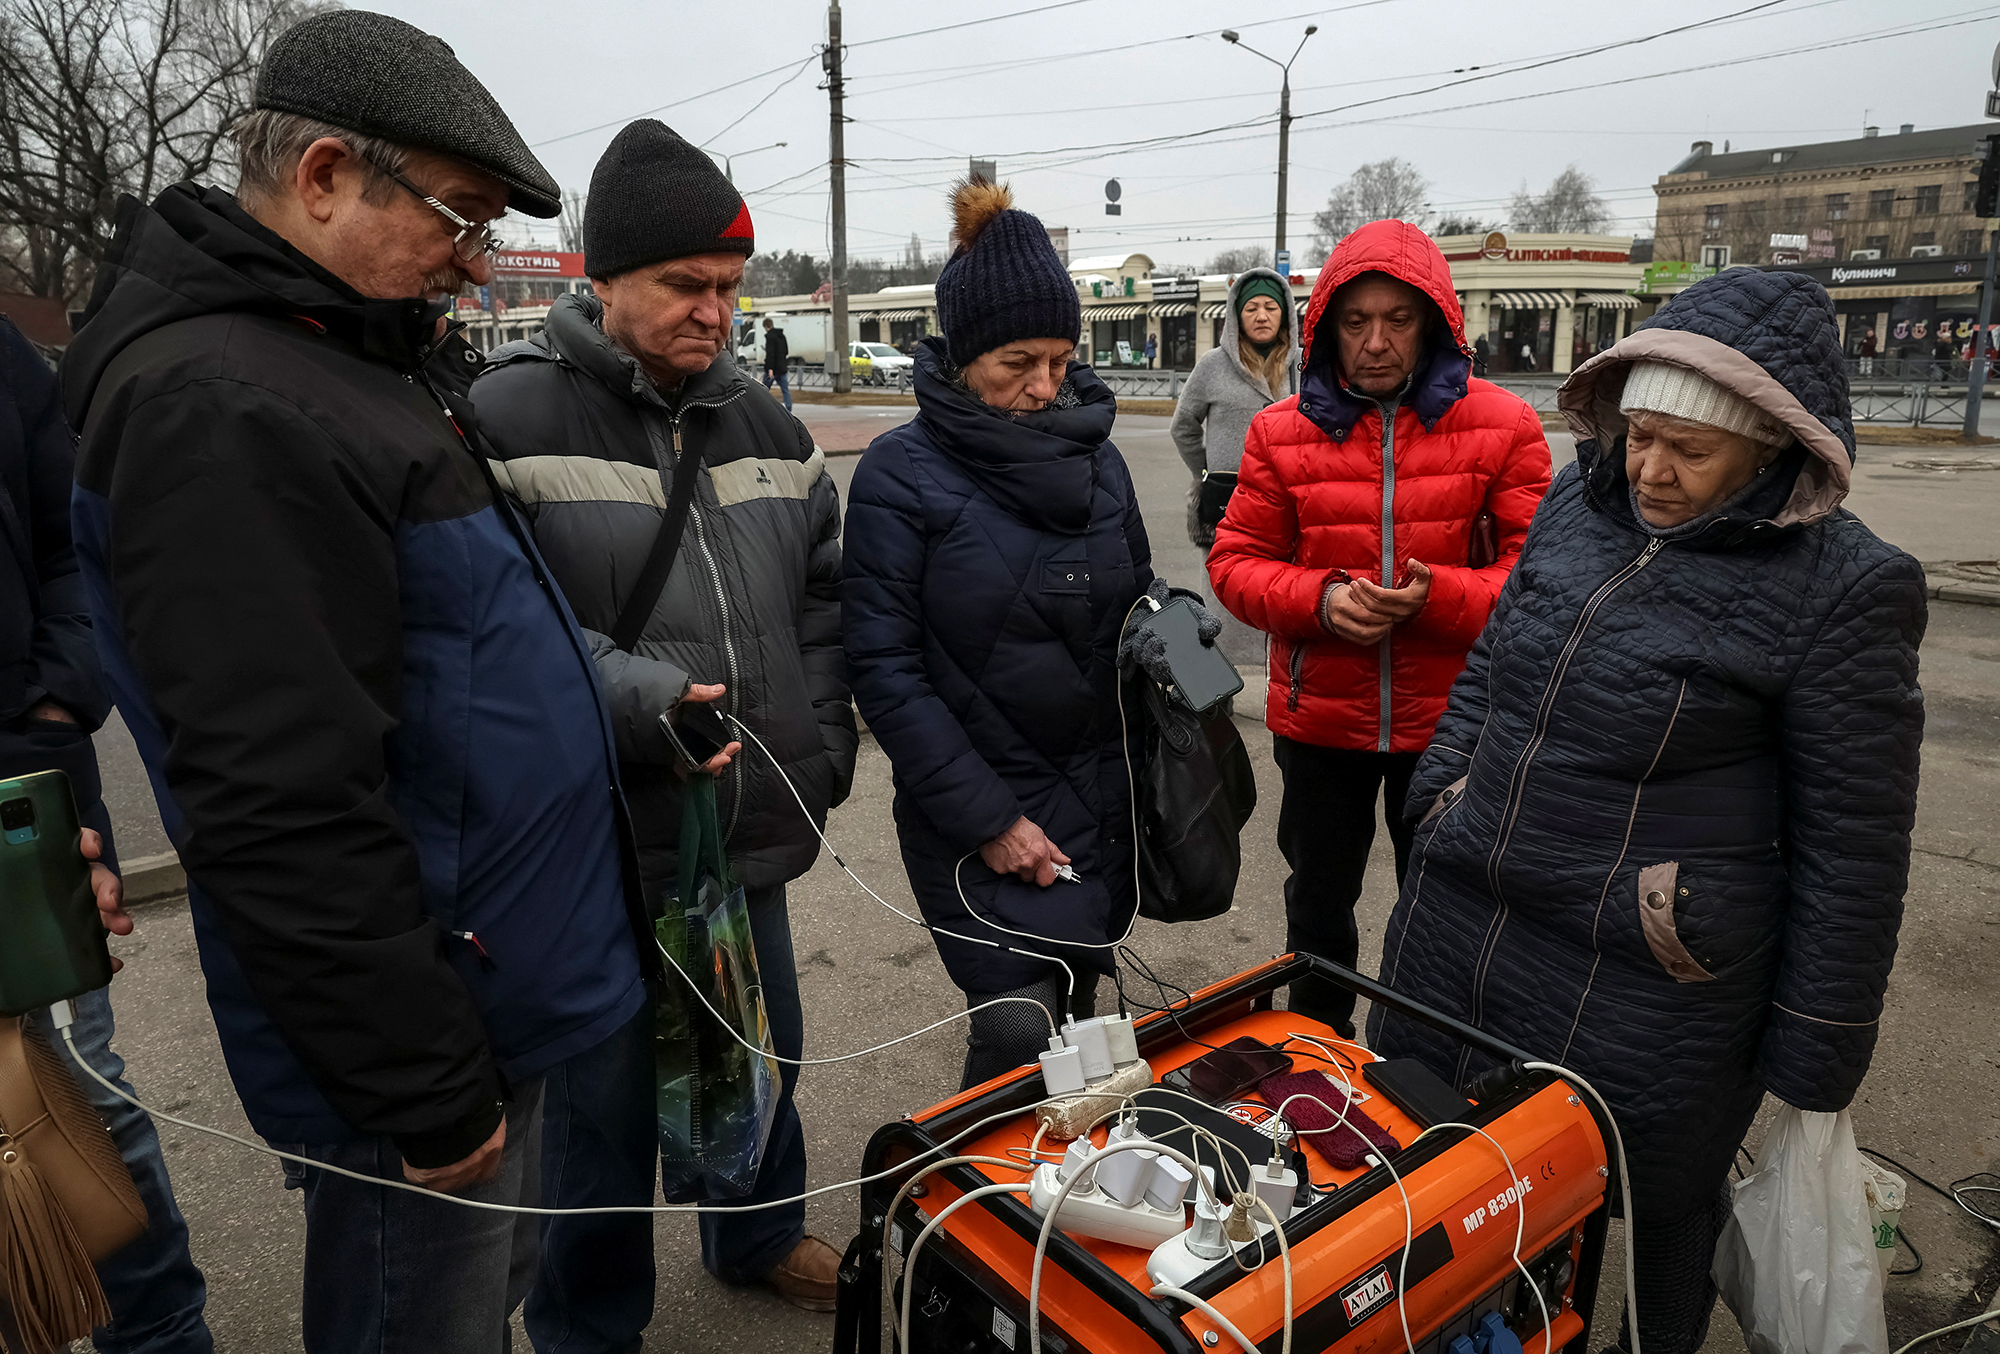 Local residents charge their phones using a generator during a power outage after critical civil infrastructure was hit by Russian missile attacks, in Kharkiv, Ukraine, on March 9.